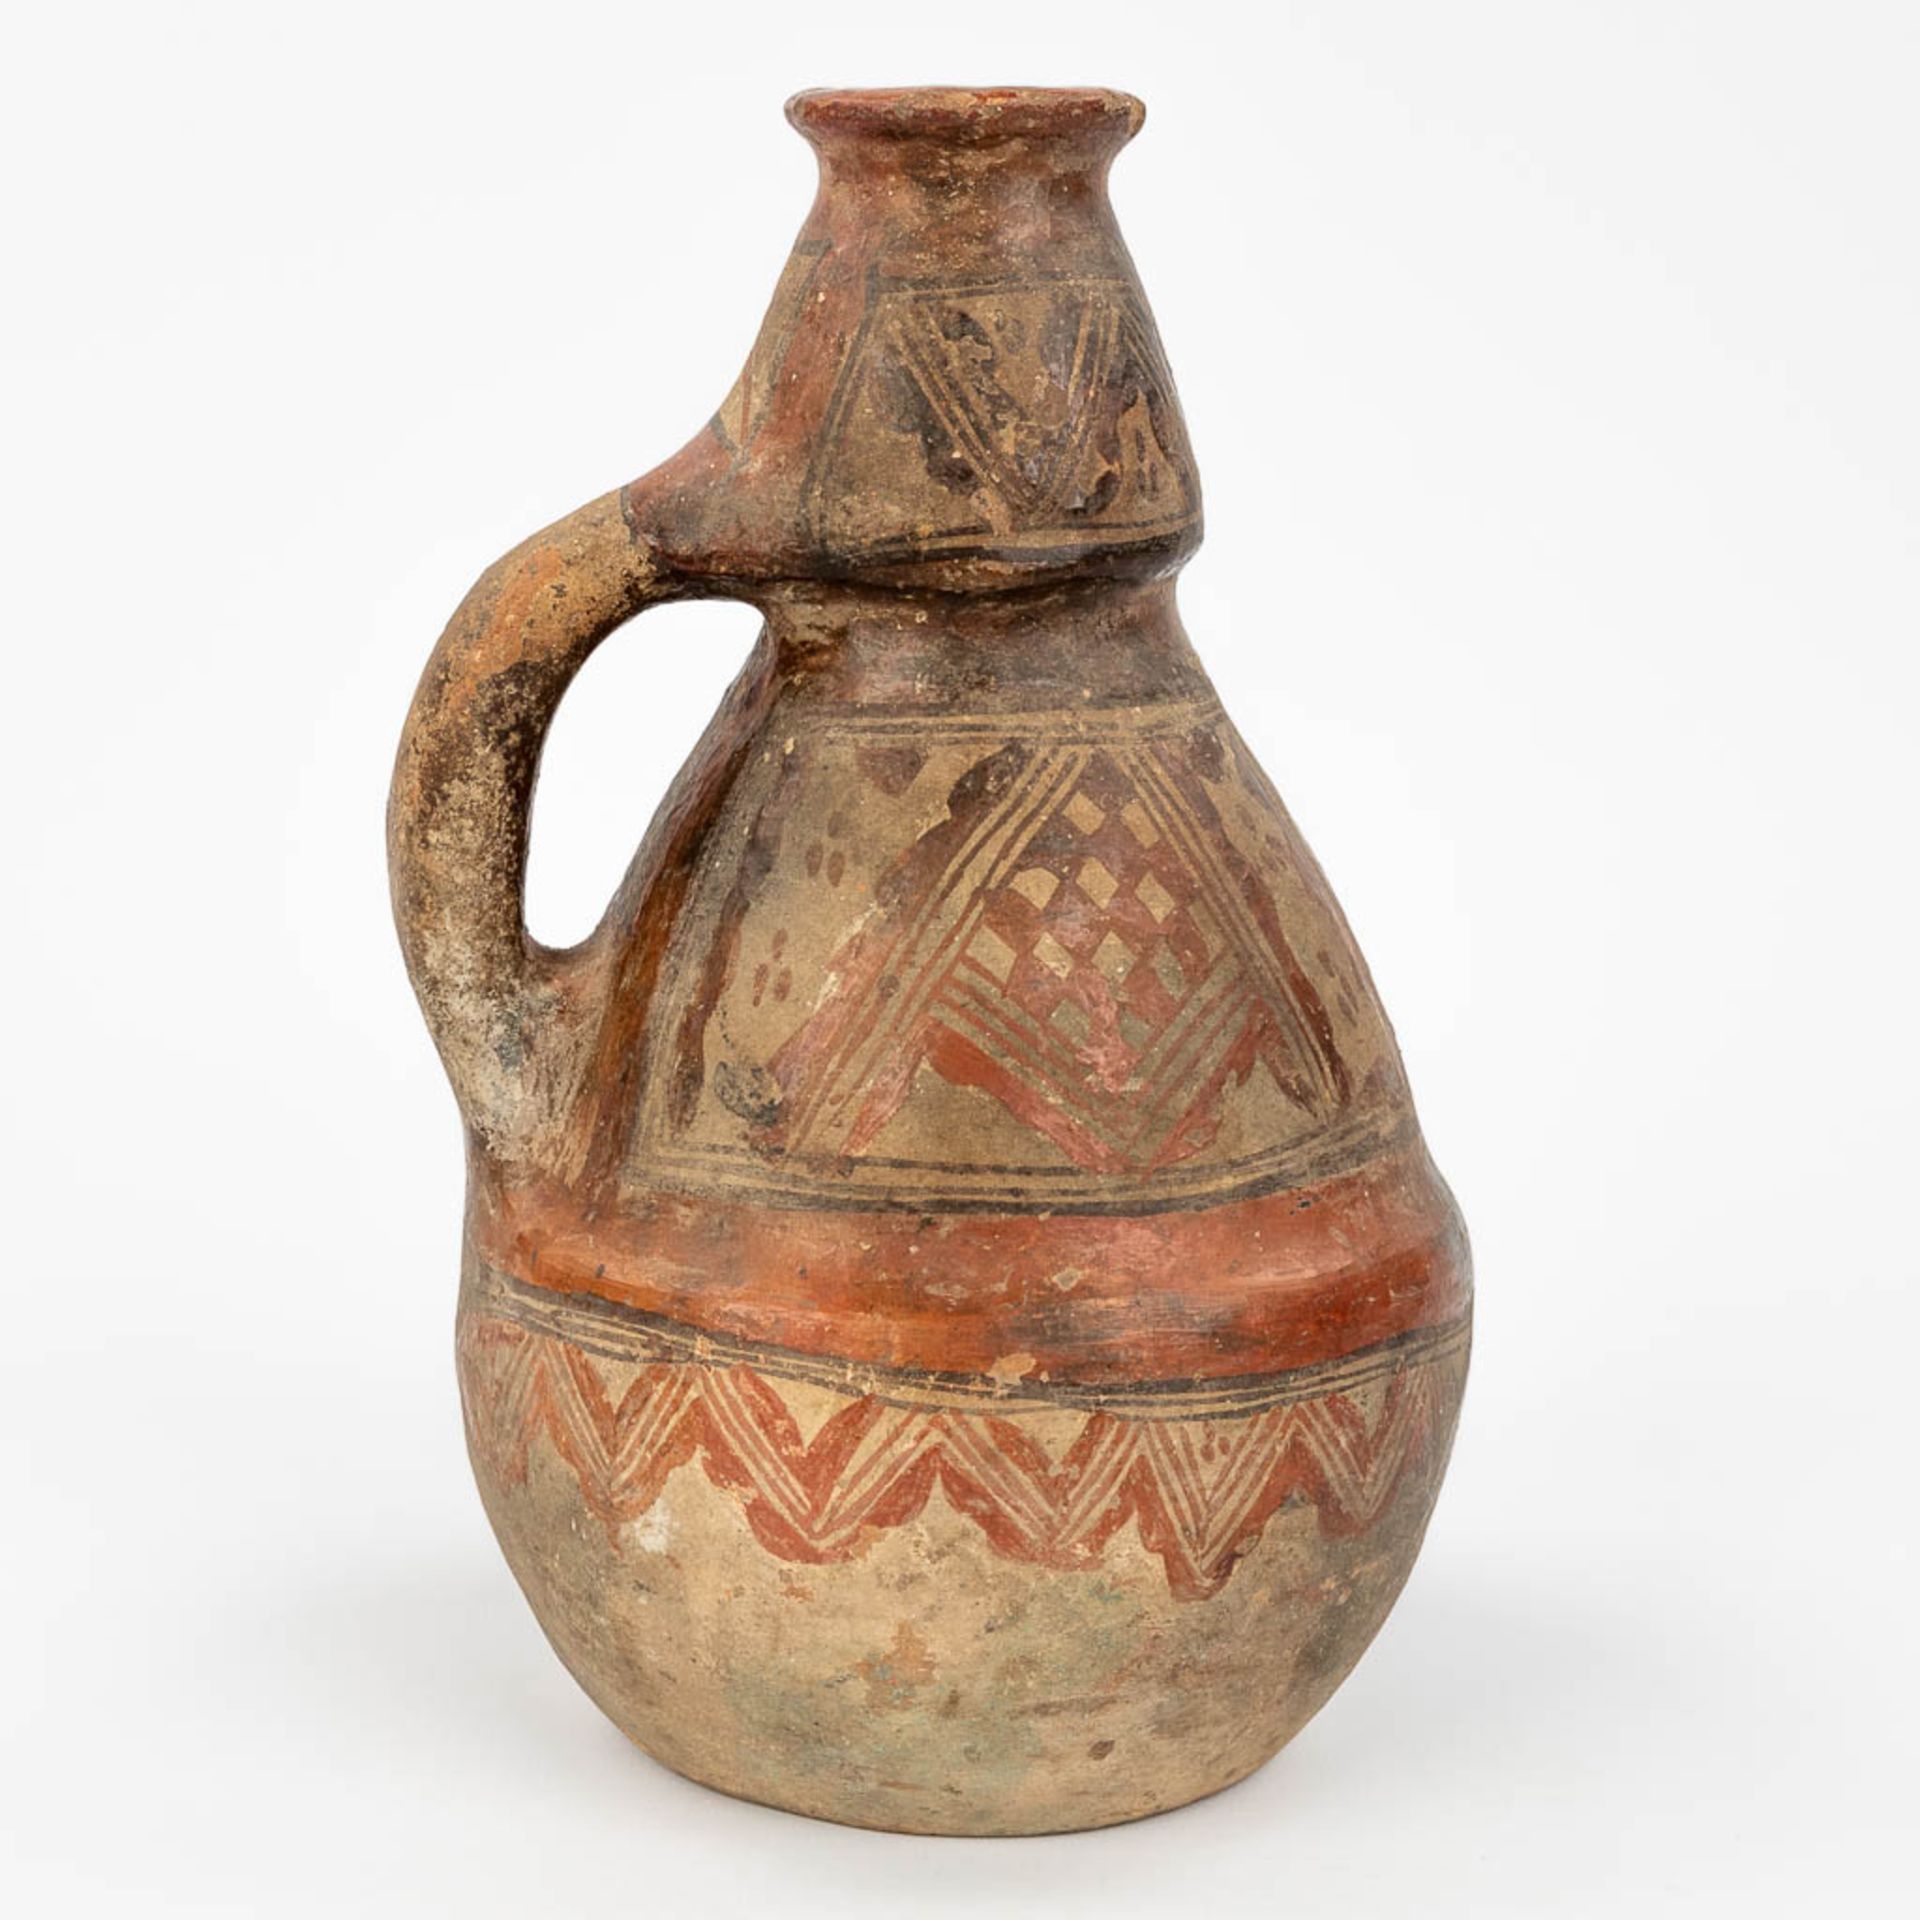 A vase probably of Northern African origin. (24 x 15cm)